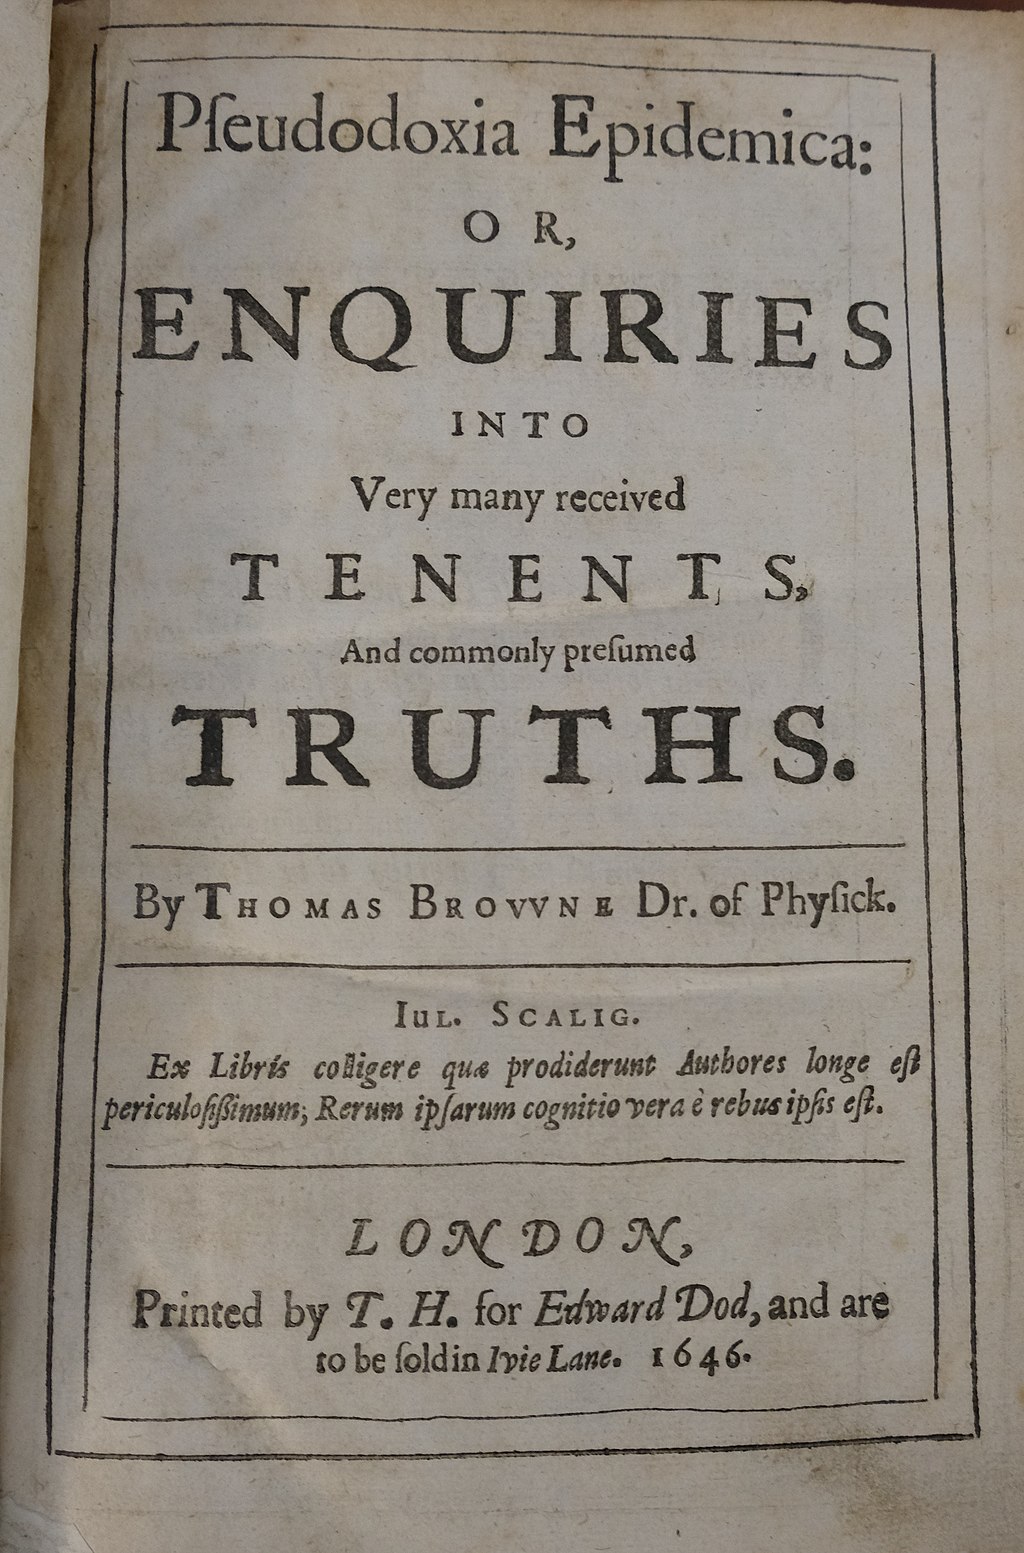 Image of the title page of a 1646 copy of Thomas Browne's "Pseudodoxia Epidemica," or "Vulgar Errors"